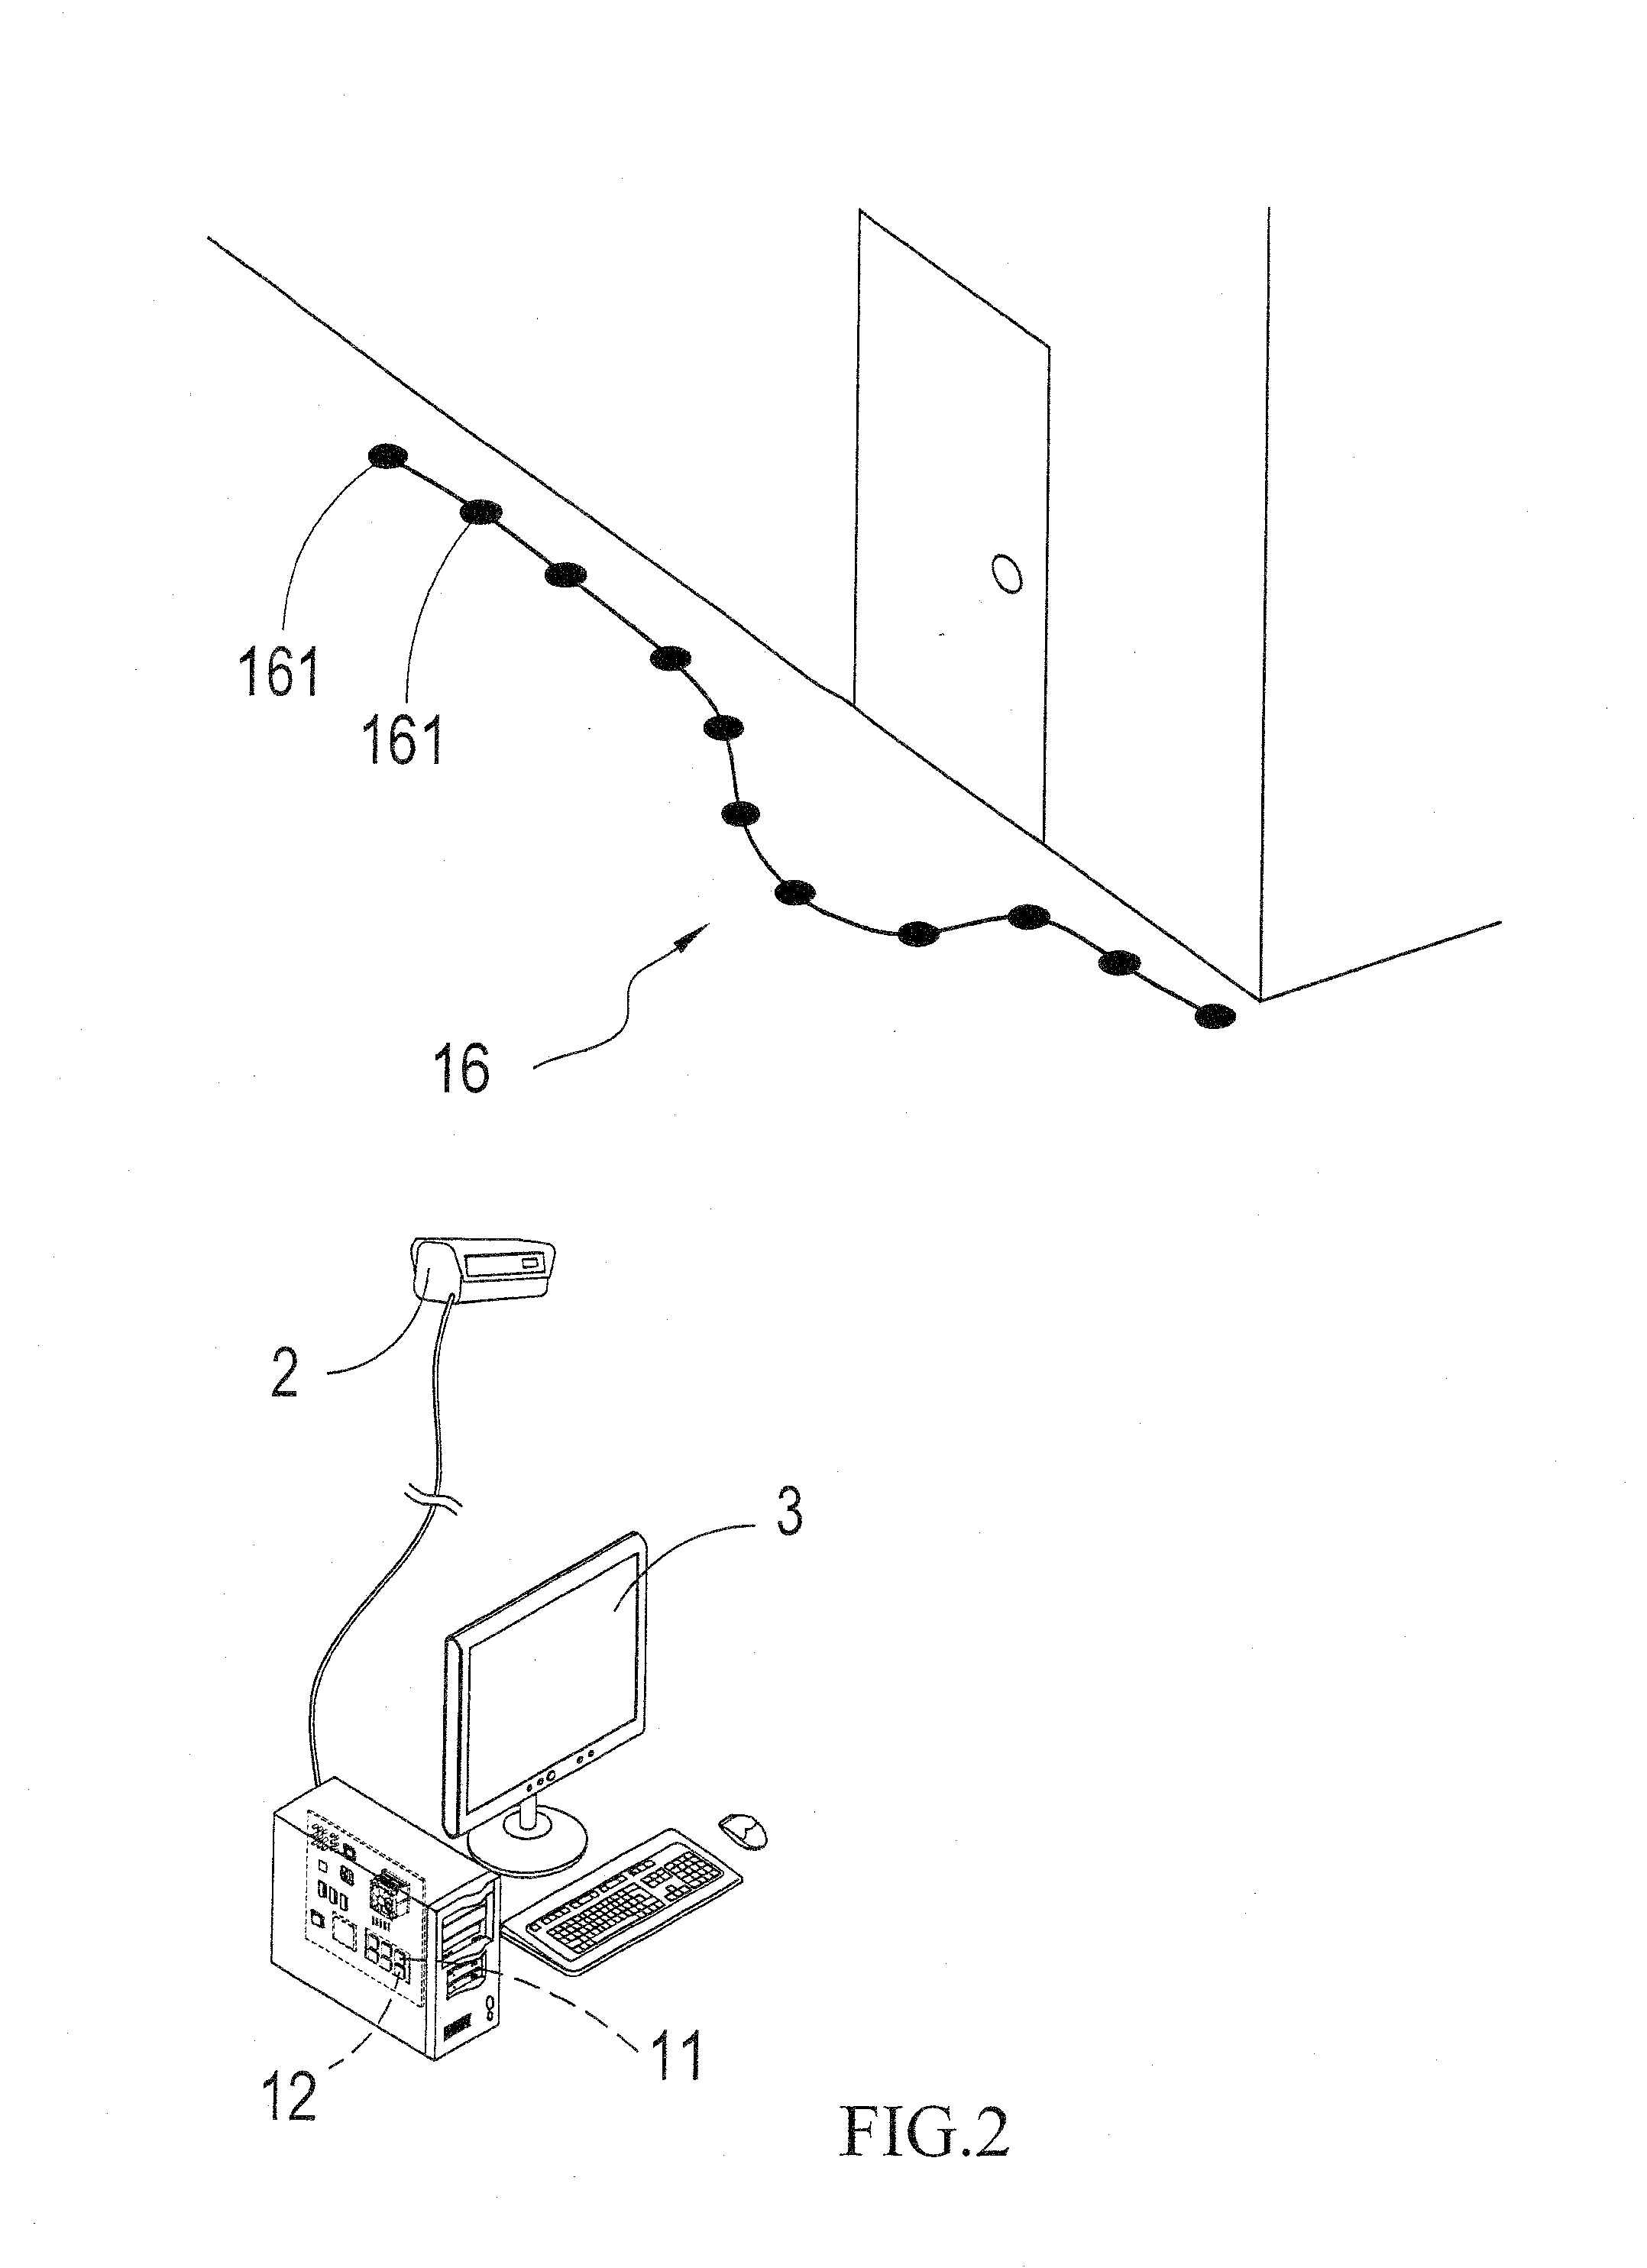 Alarm chain based monitoring device